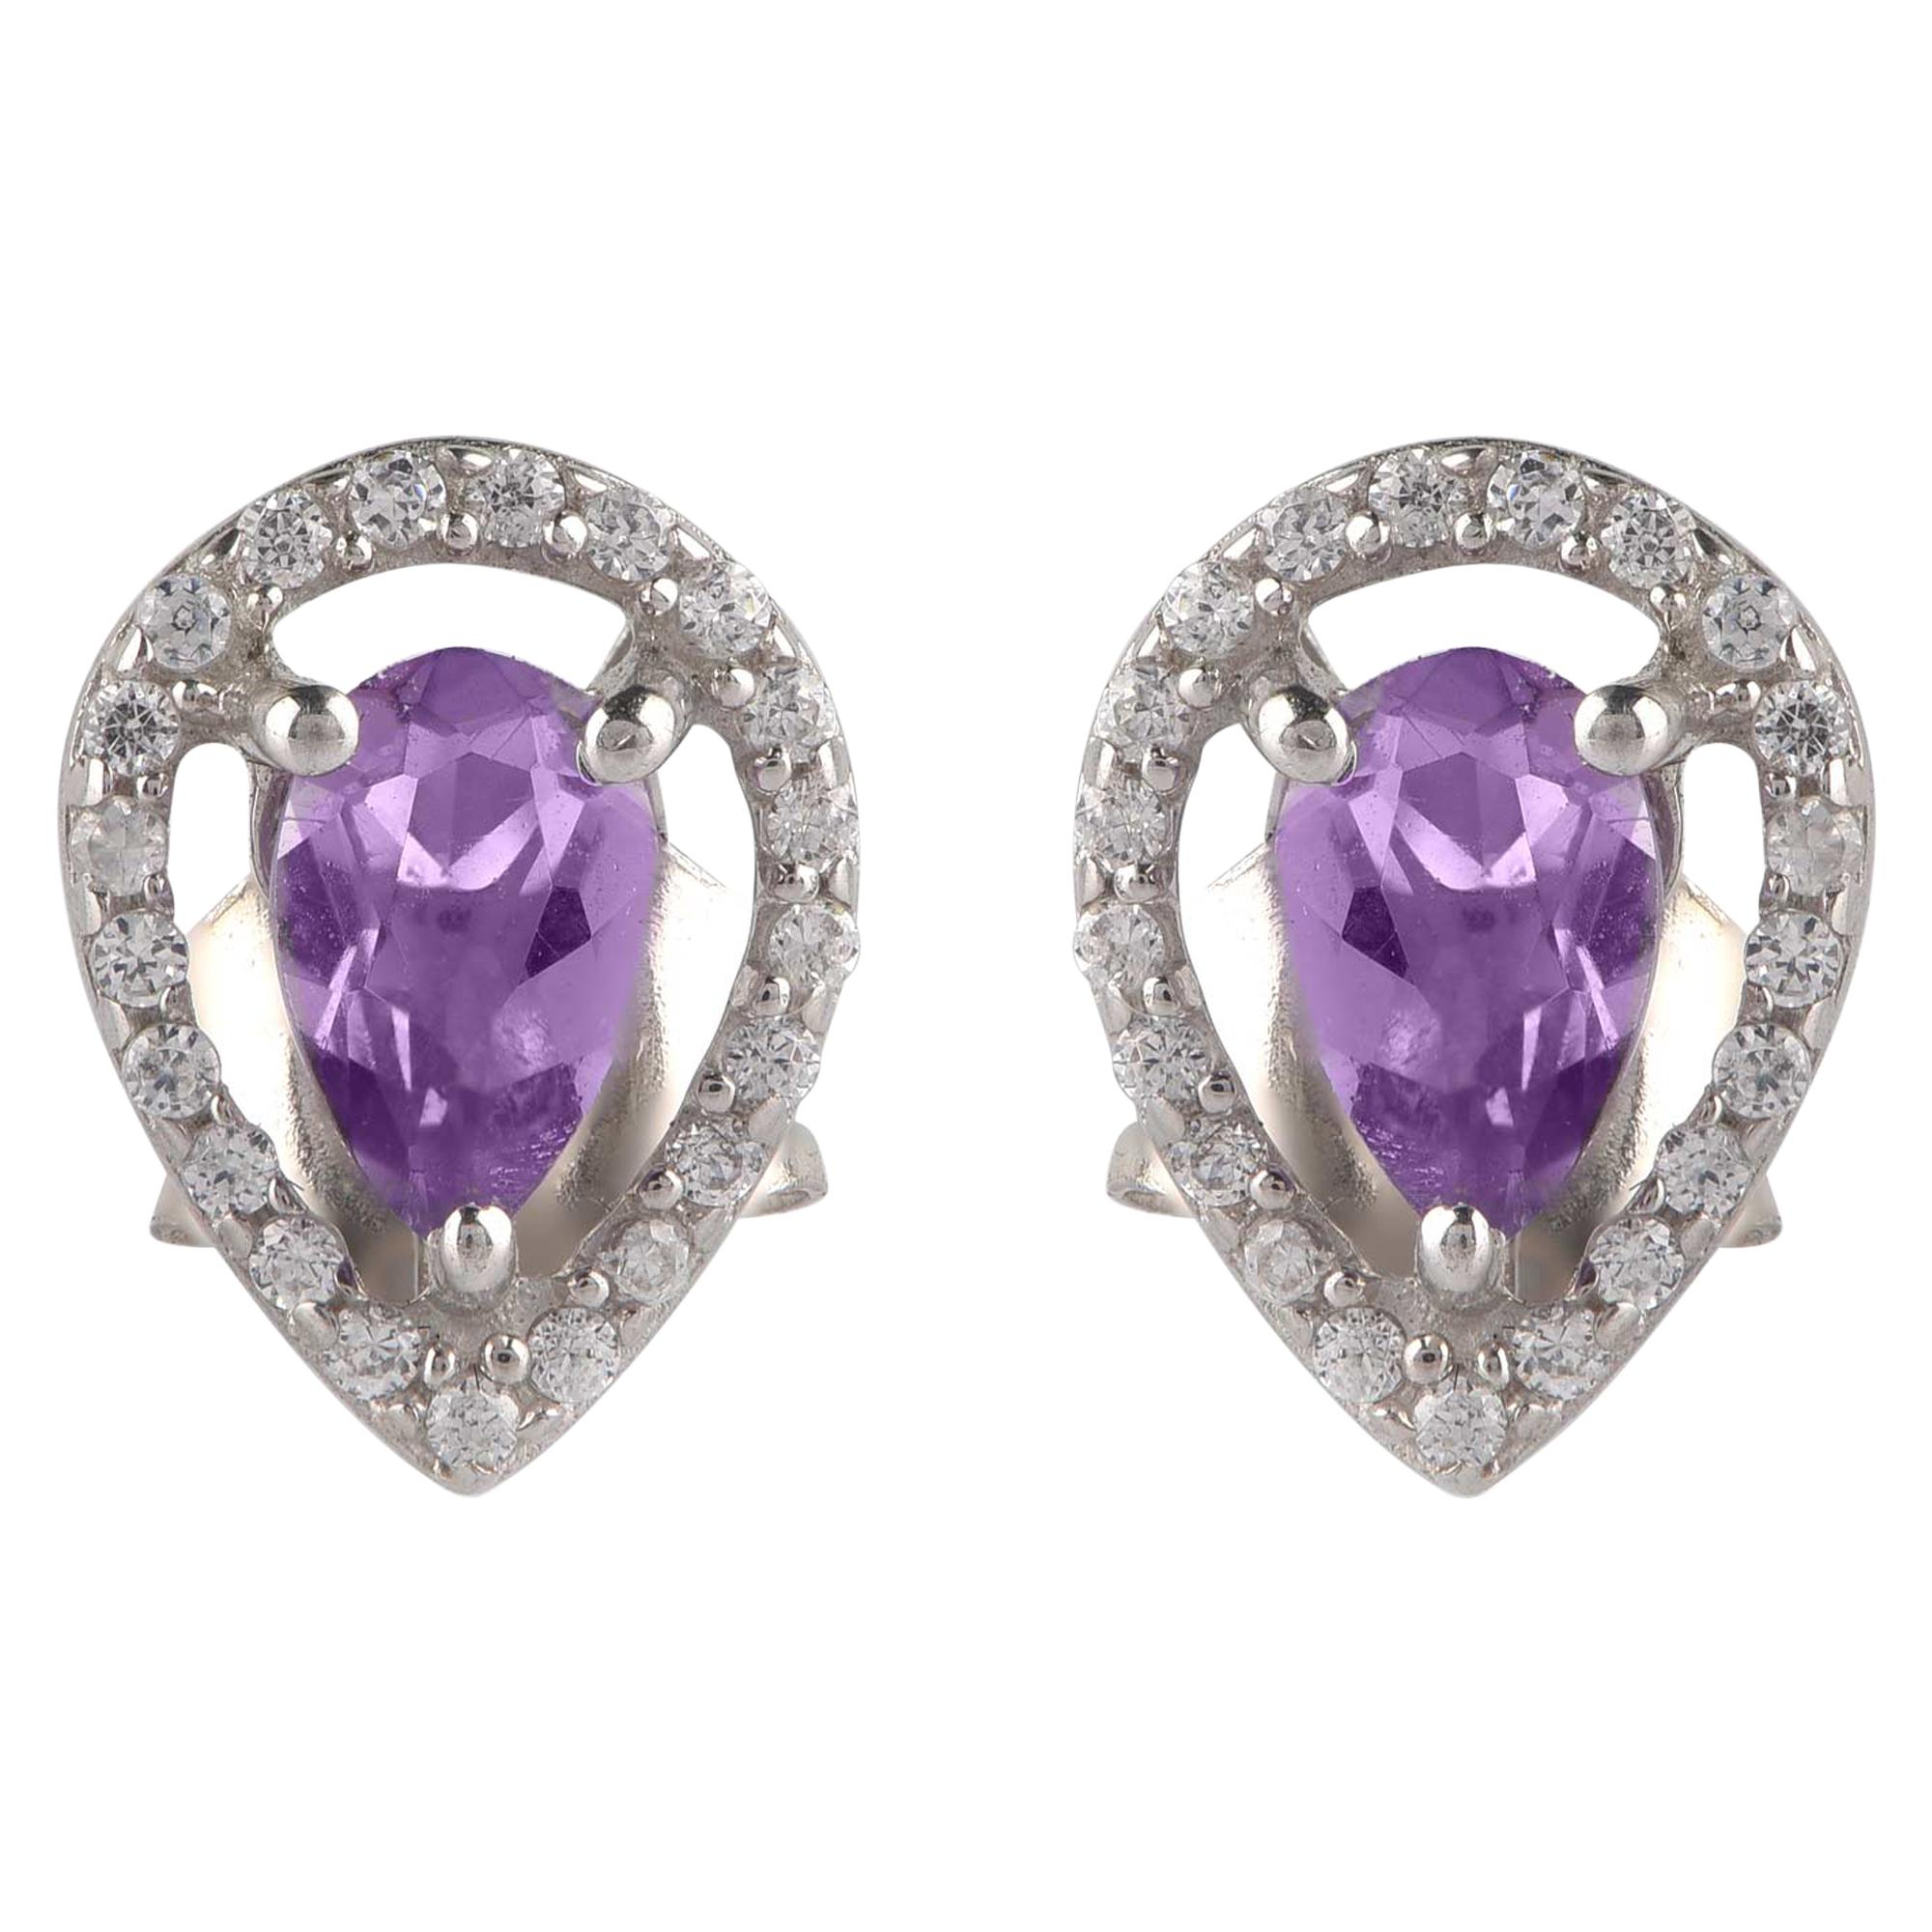 TJD 0.12 Carat Diamond and 5X3MM Pear Amethyst 18 Karat White Gold Halo Earrings For Sale